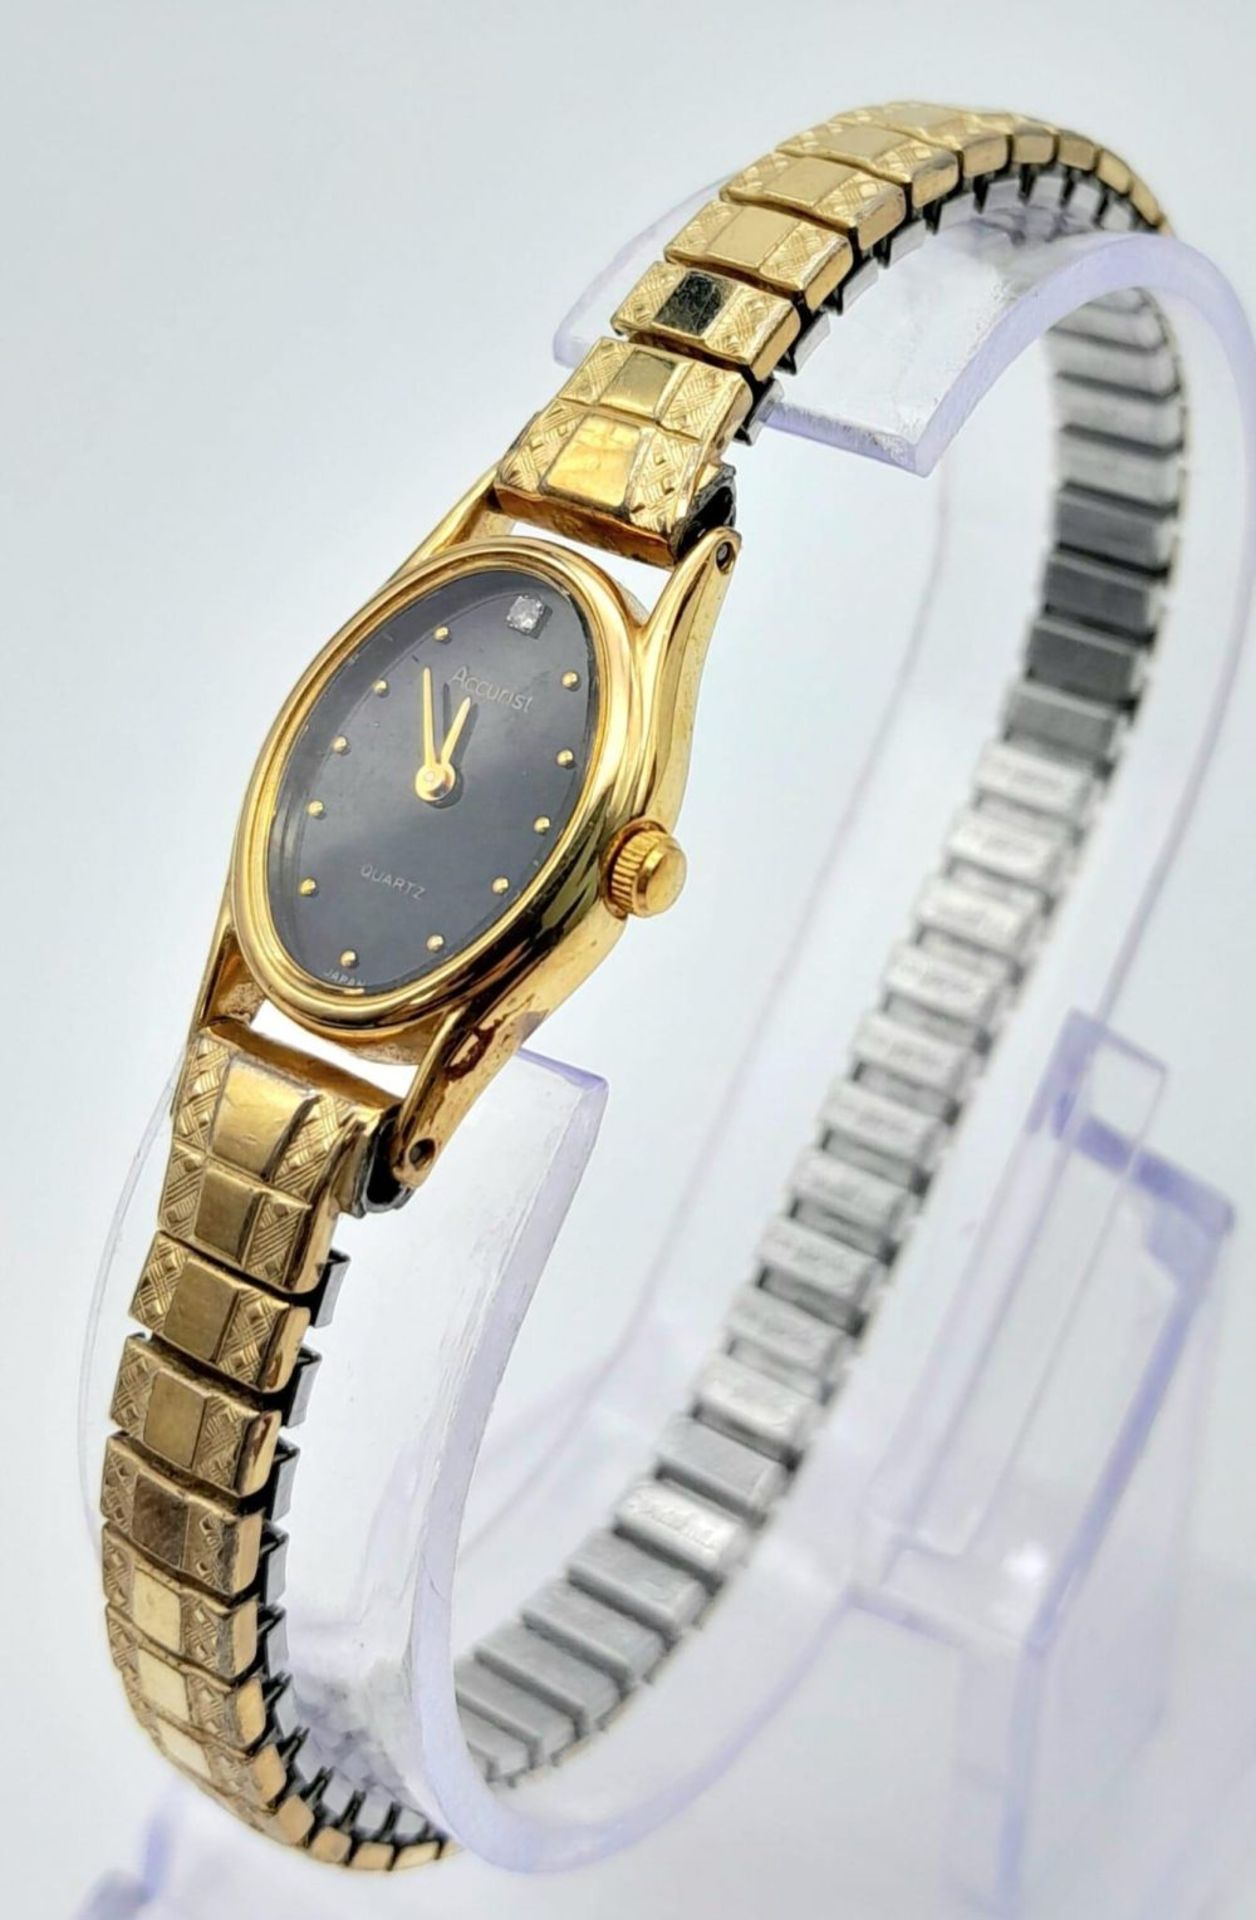 A Vintage Accurist Quartz Ladies Gold Tone Watch. Stainless steel strap and case - 10mm. Black dial. - Image 2 of 15